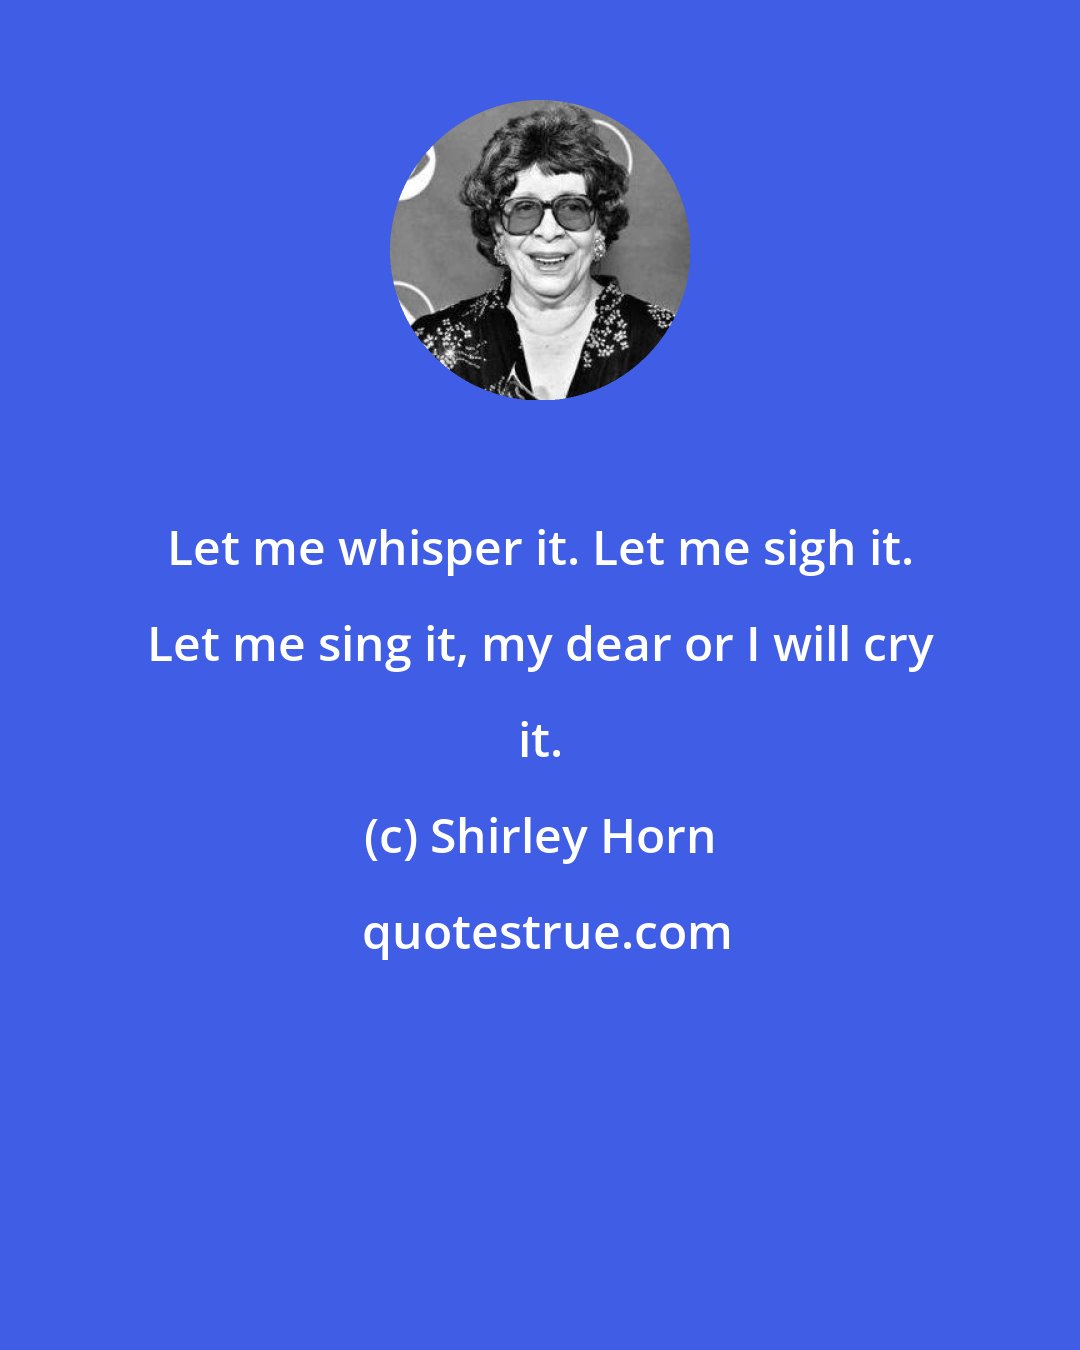 Shirley Horn: Let me whisper it. Let me sigh it. Let me sing it, my dear or I will cry it.